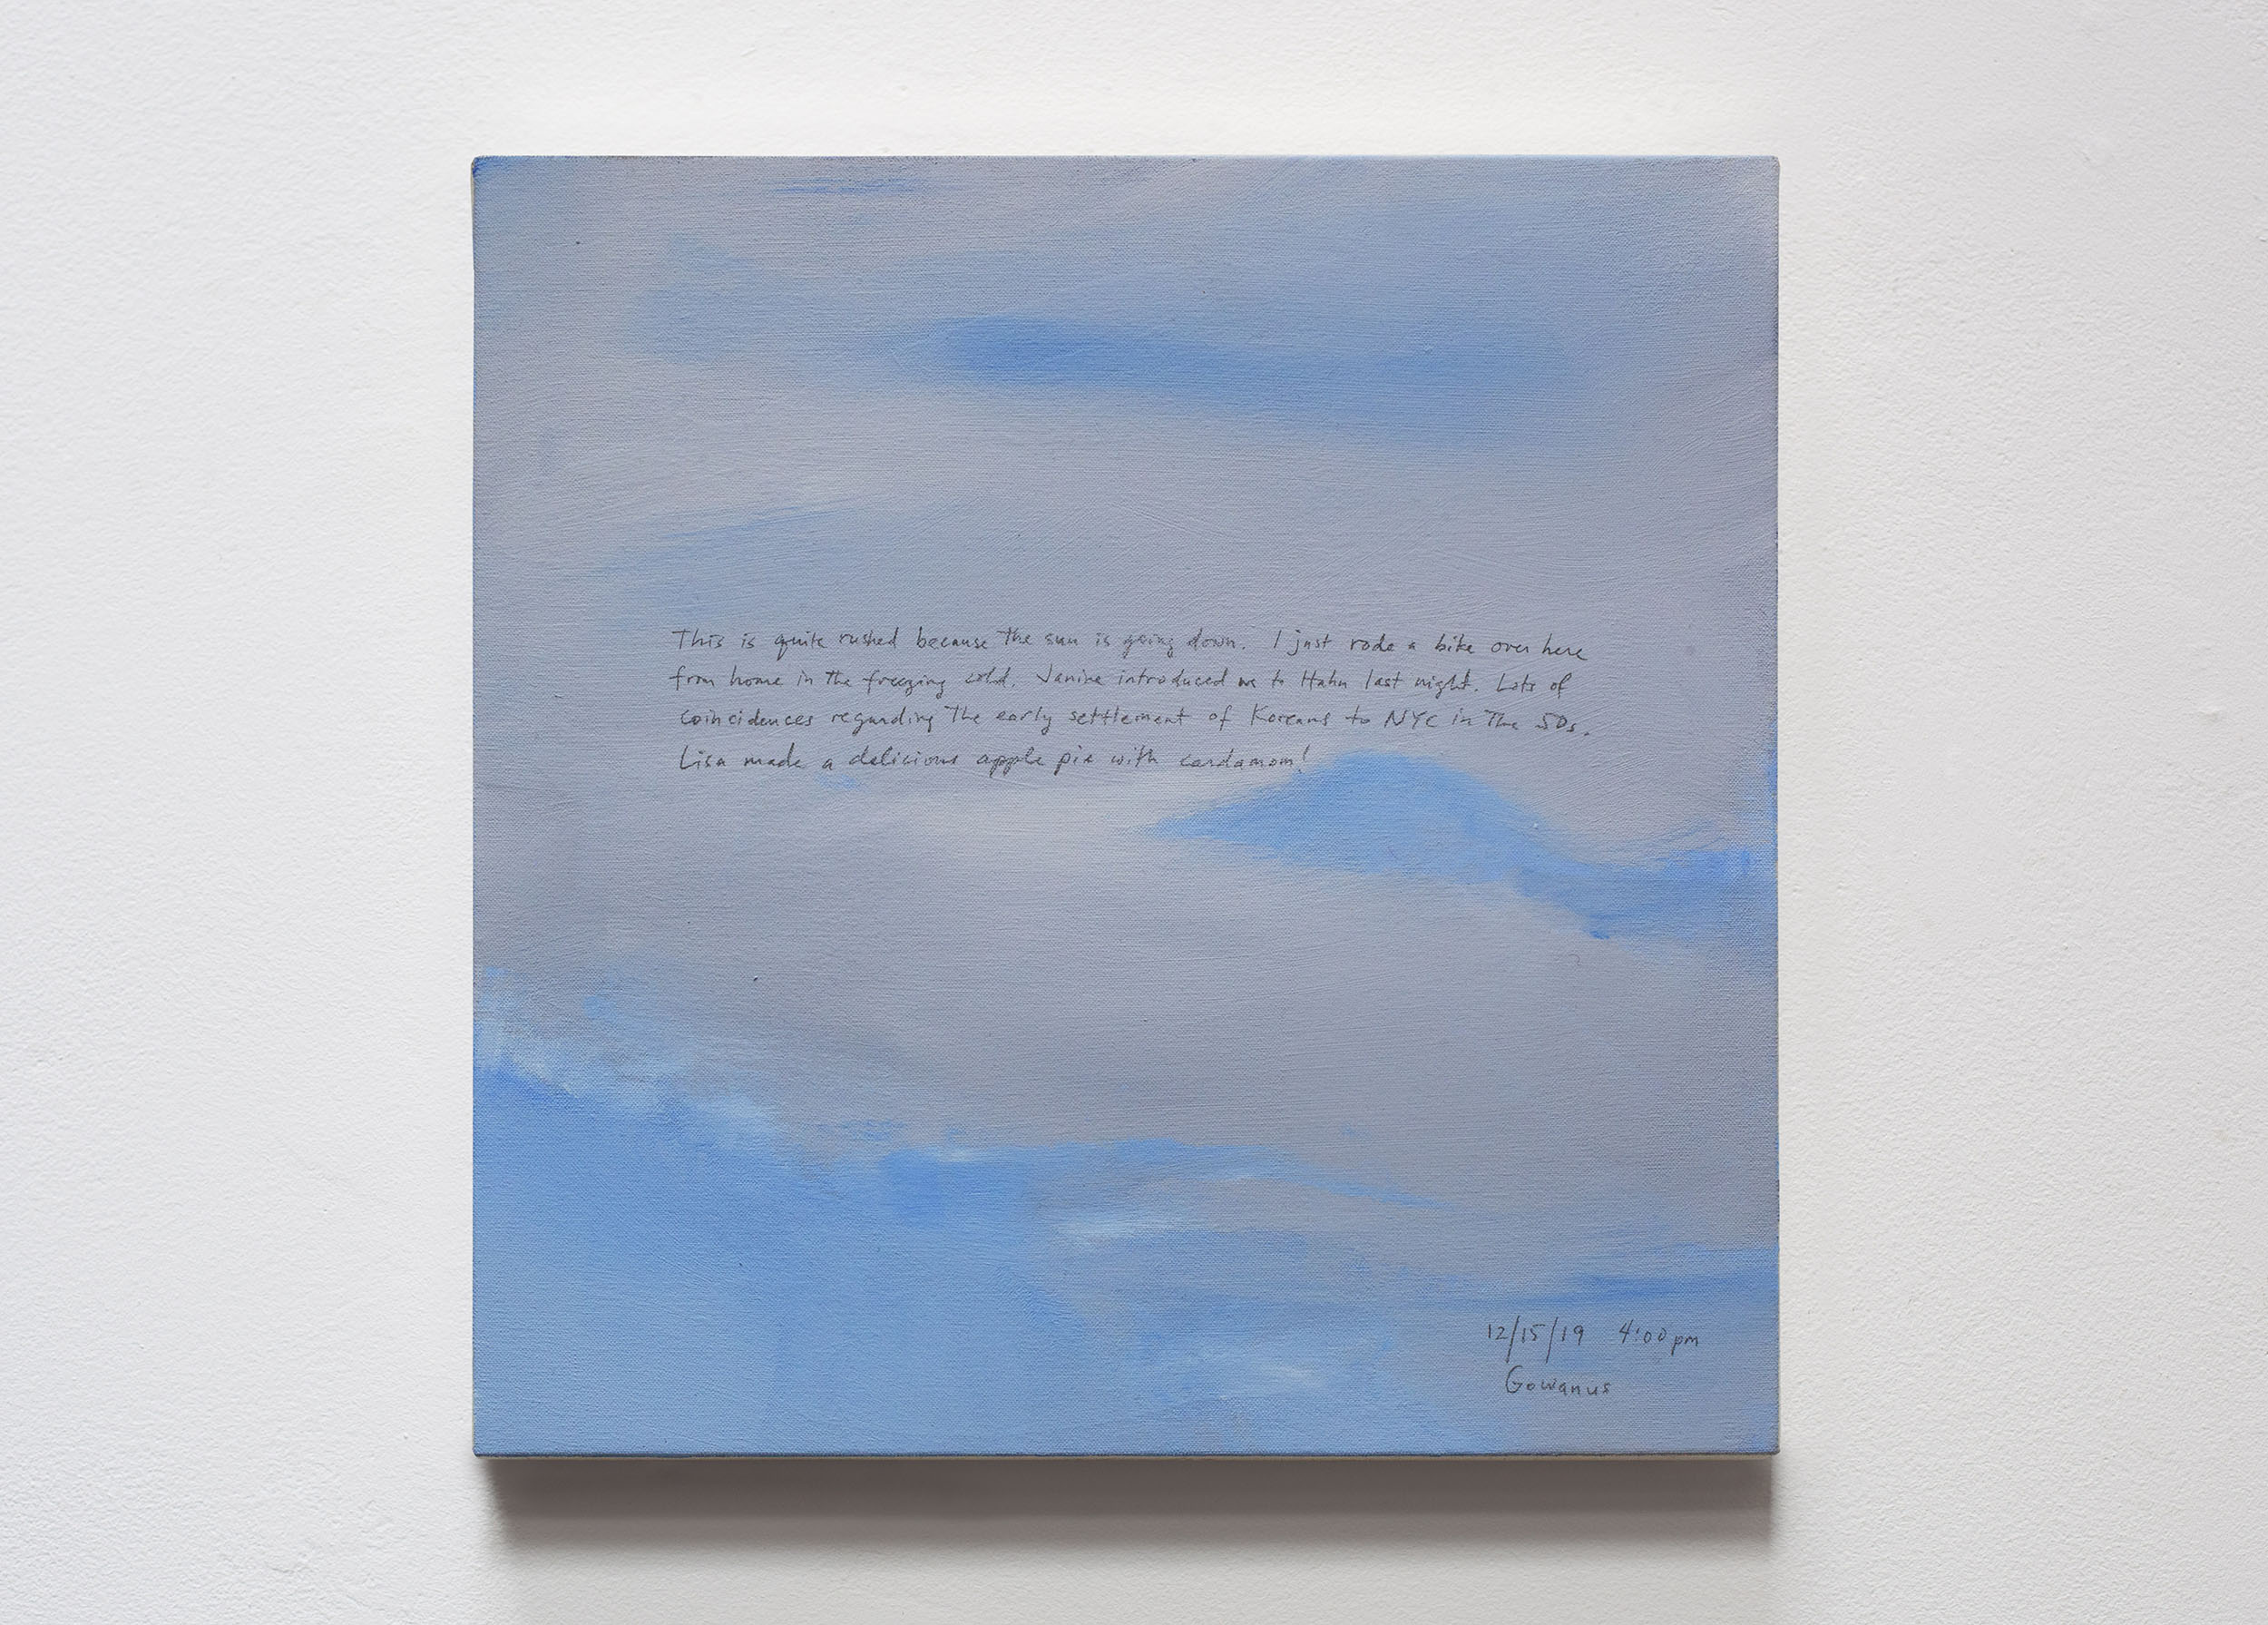 A 14 × 14 inch, acrylic painting of the sky. A journal entry is handwritten on the painting:

“This is quite rushed because the sun is going down. I just rode a bike over here from him in the freezing cold. Janine introduced me to Hahn last night. Lots of coincidences regarding the early settlement of Koreans to NYC in the 50s. Lisa made a delicious apple pie with cardamom!

12/15/19 4:00 pm
Gowanus”